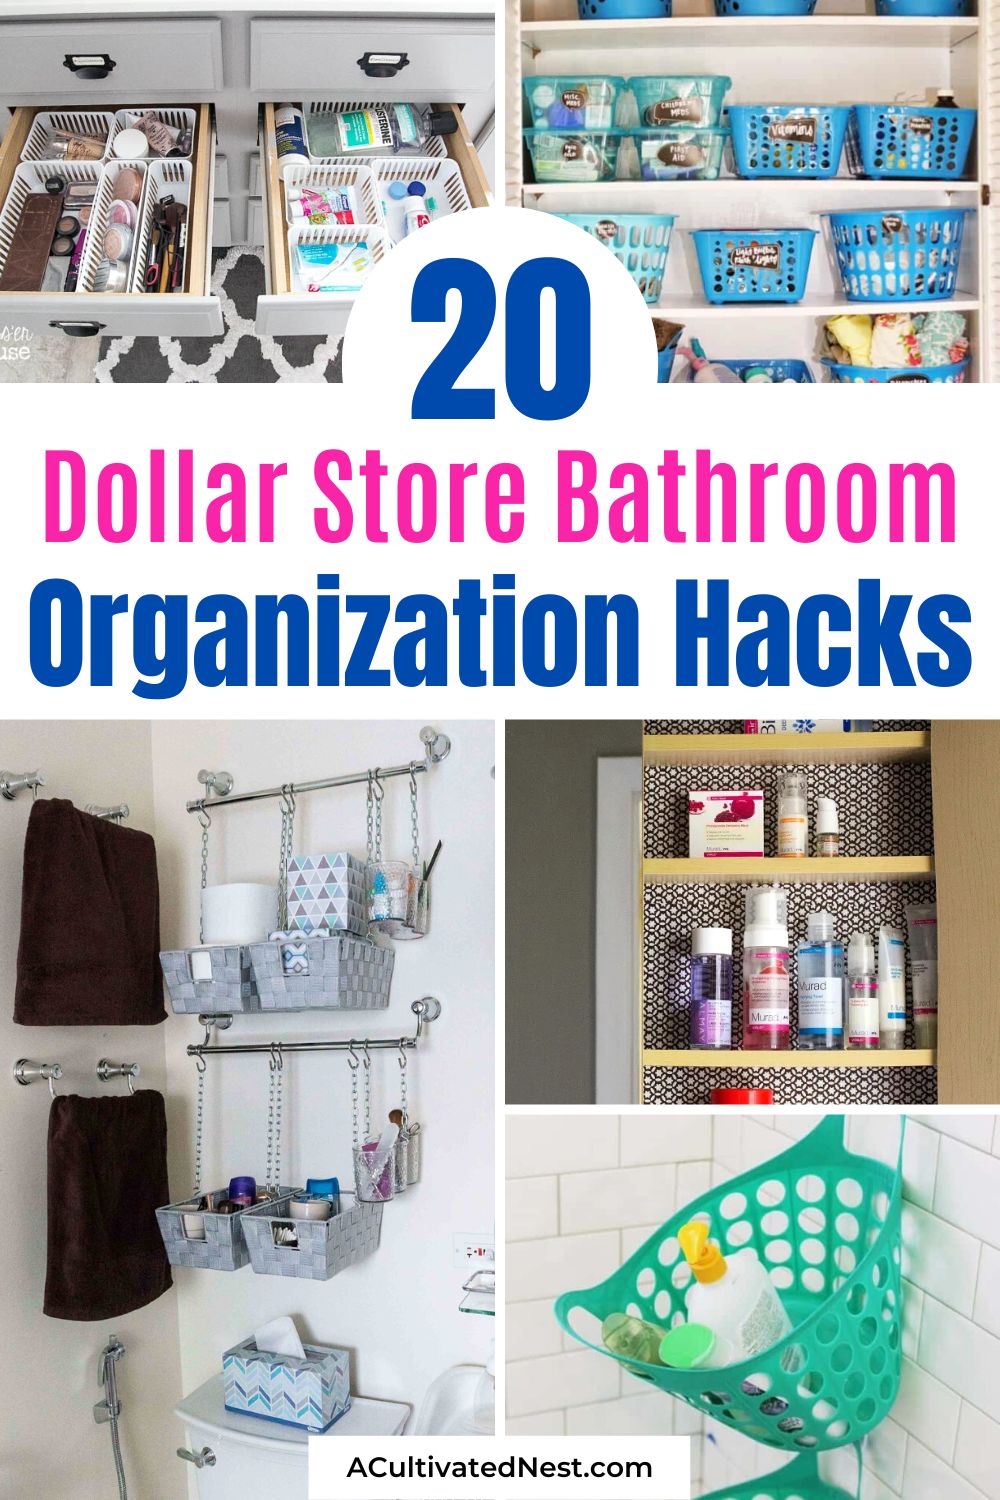 20 Genius Dollar Store Bathroom Organization Hacks- You can find the perfect way to keep your bathroom tidy and organized on a budget with these clever dollar store bathroom organization hacks! | organizing on a budget from the dollar store, #organizing #dollarStoreOrganization #organize #homeOrganization #ACultivatedNest